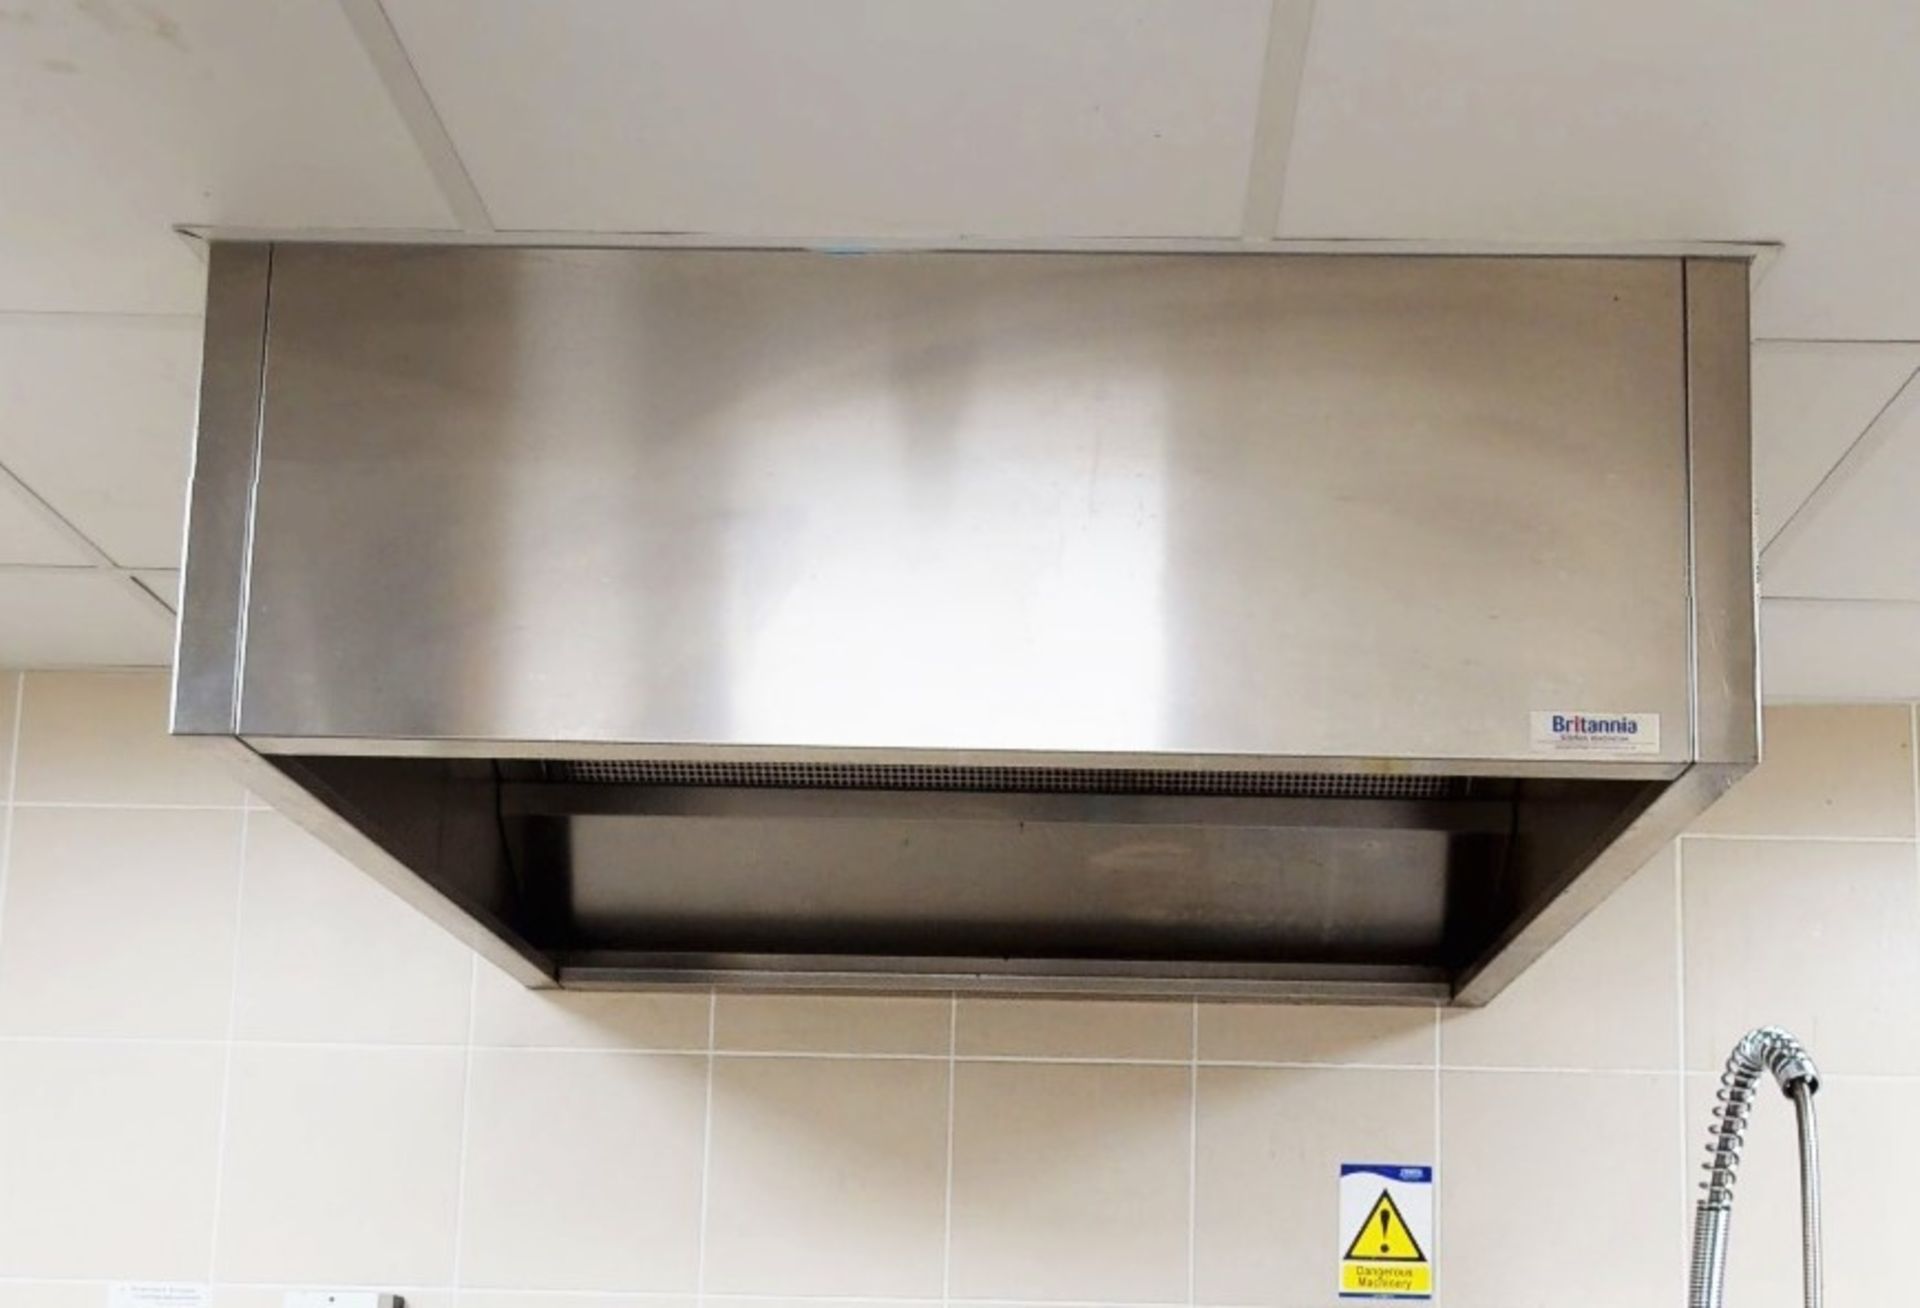 1 x Commercial Stainless Steel Extraction Canopy - CL701 - Location: Ashton Moss, Manchester, OL7 - Image 2 of 8